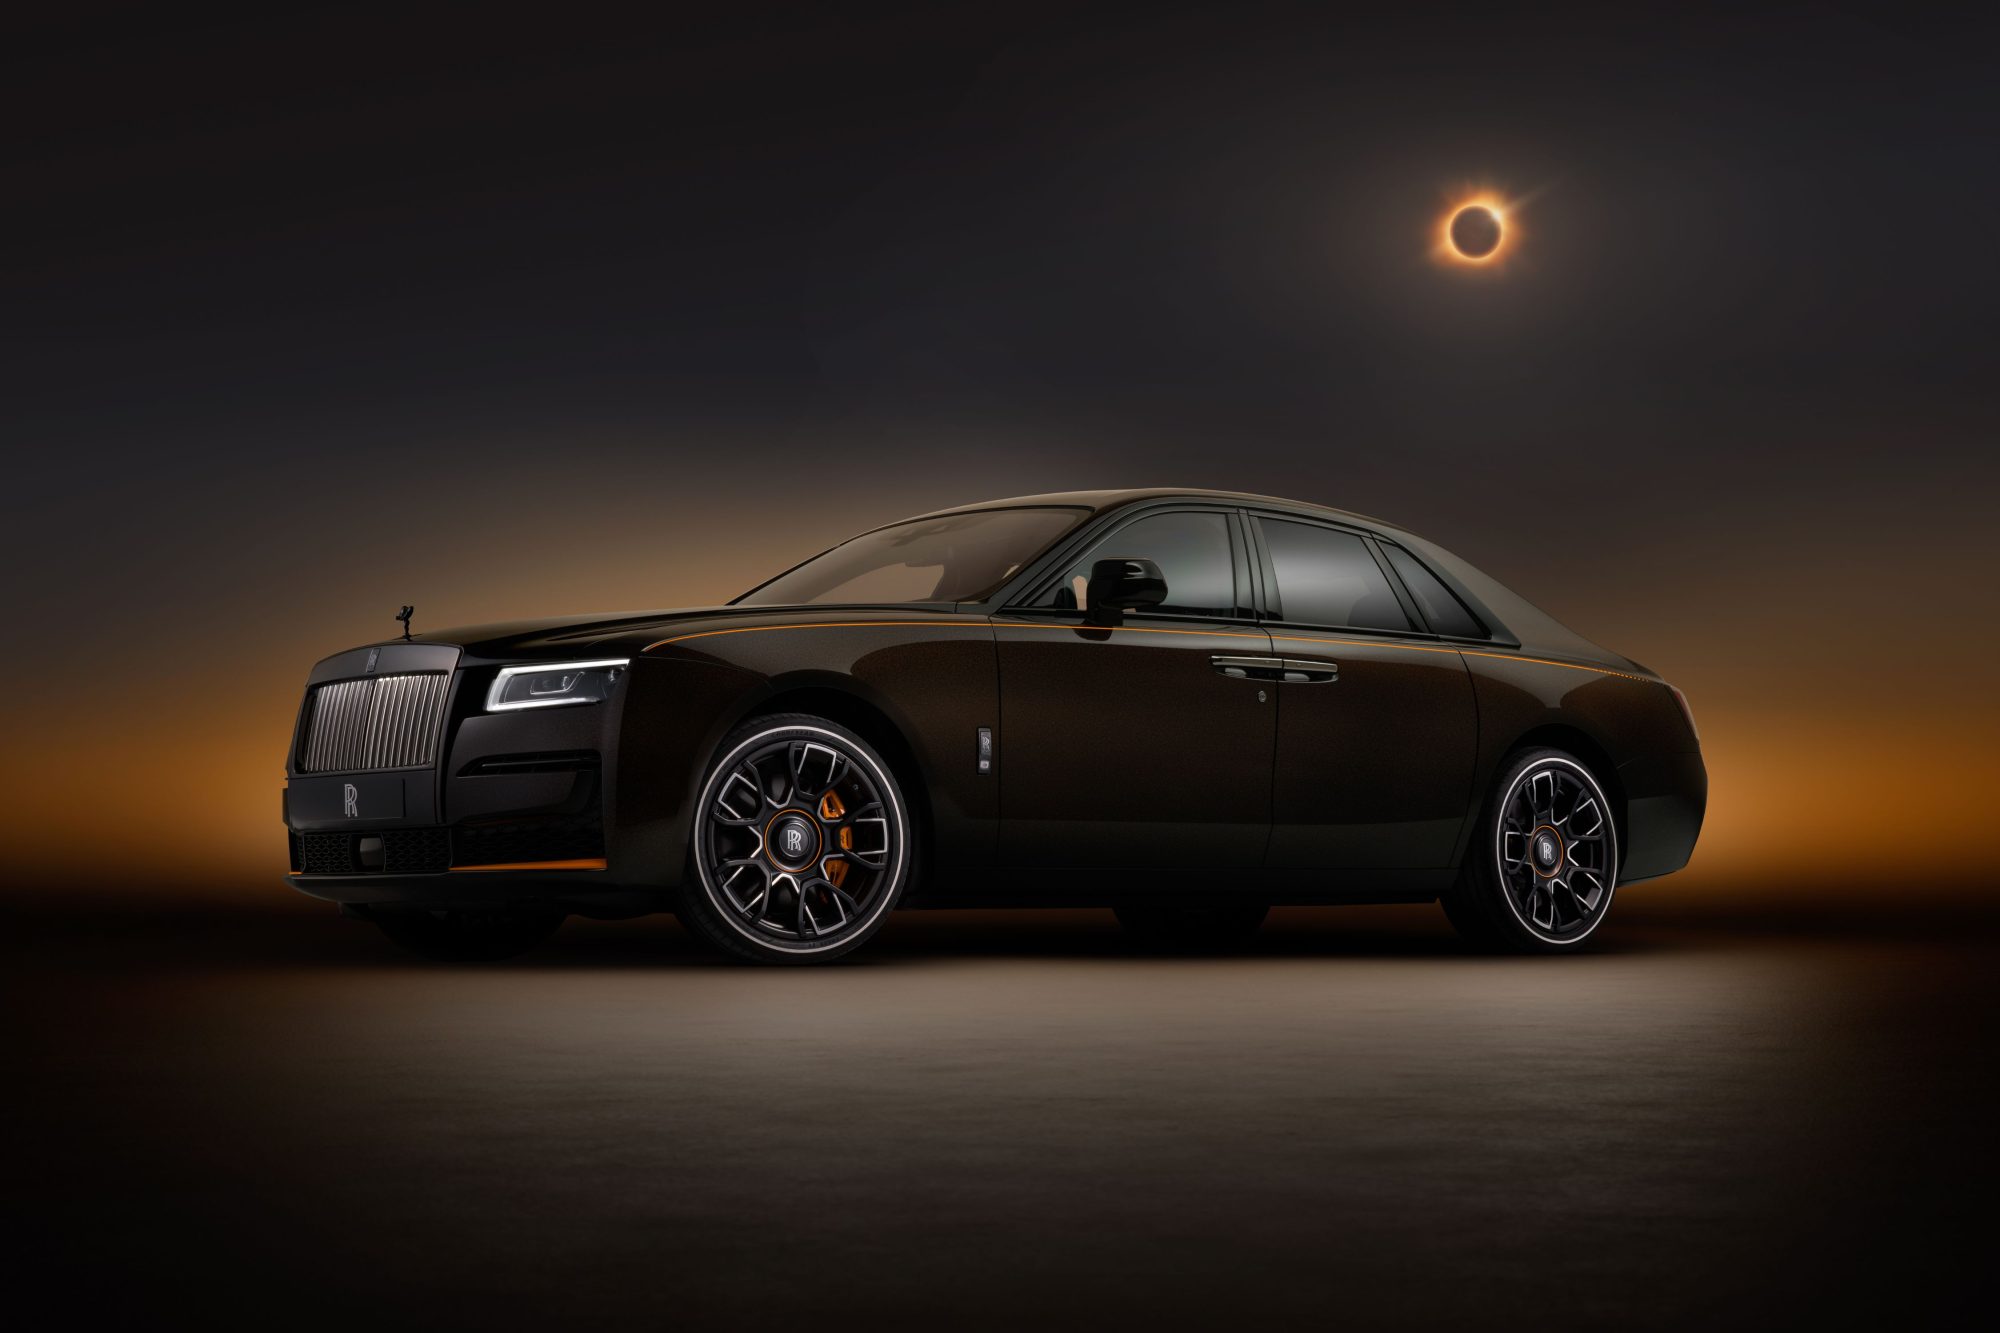 Introducing the Rolls-Royce Black Badge Ghost Ékleipsis Private Collection